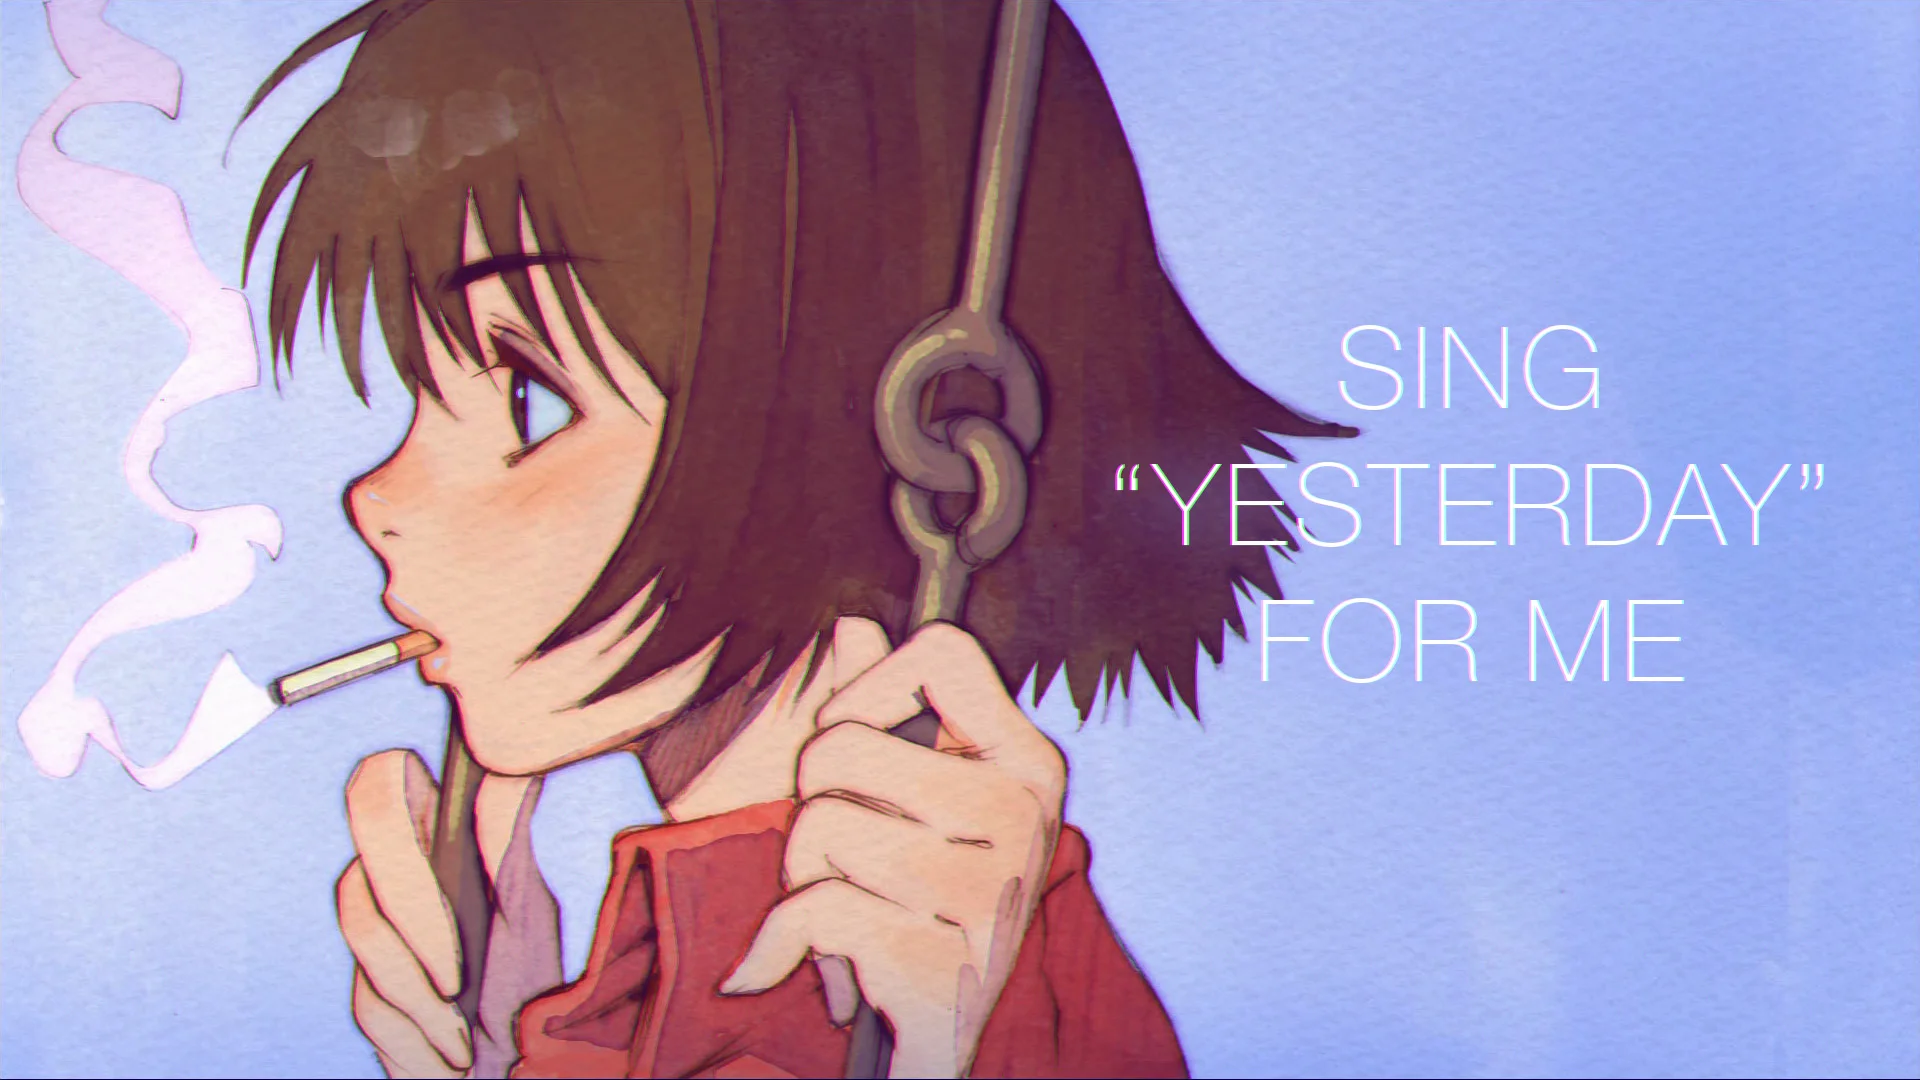 SING “YESTERDAY” FOR ME